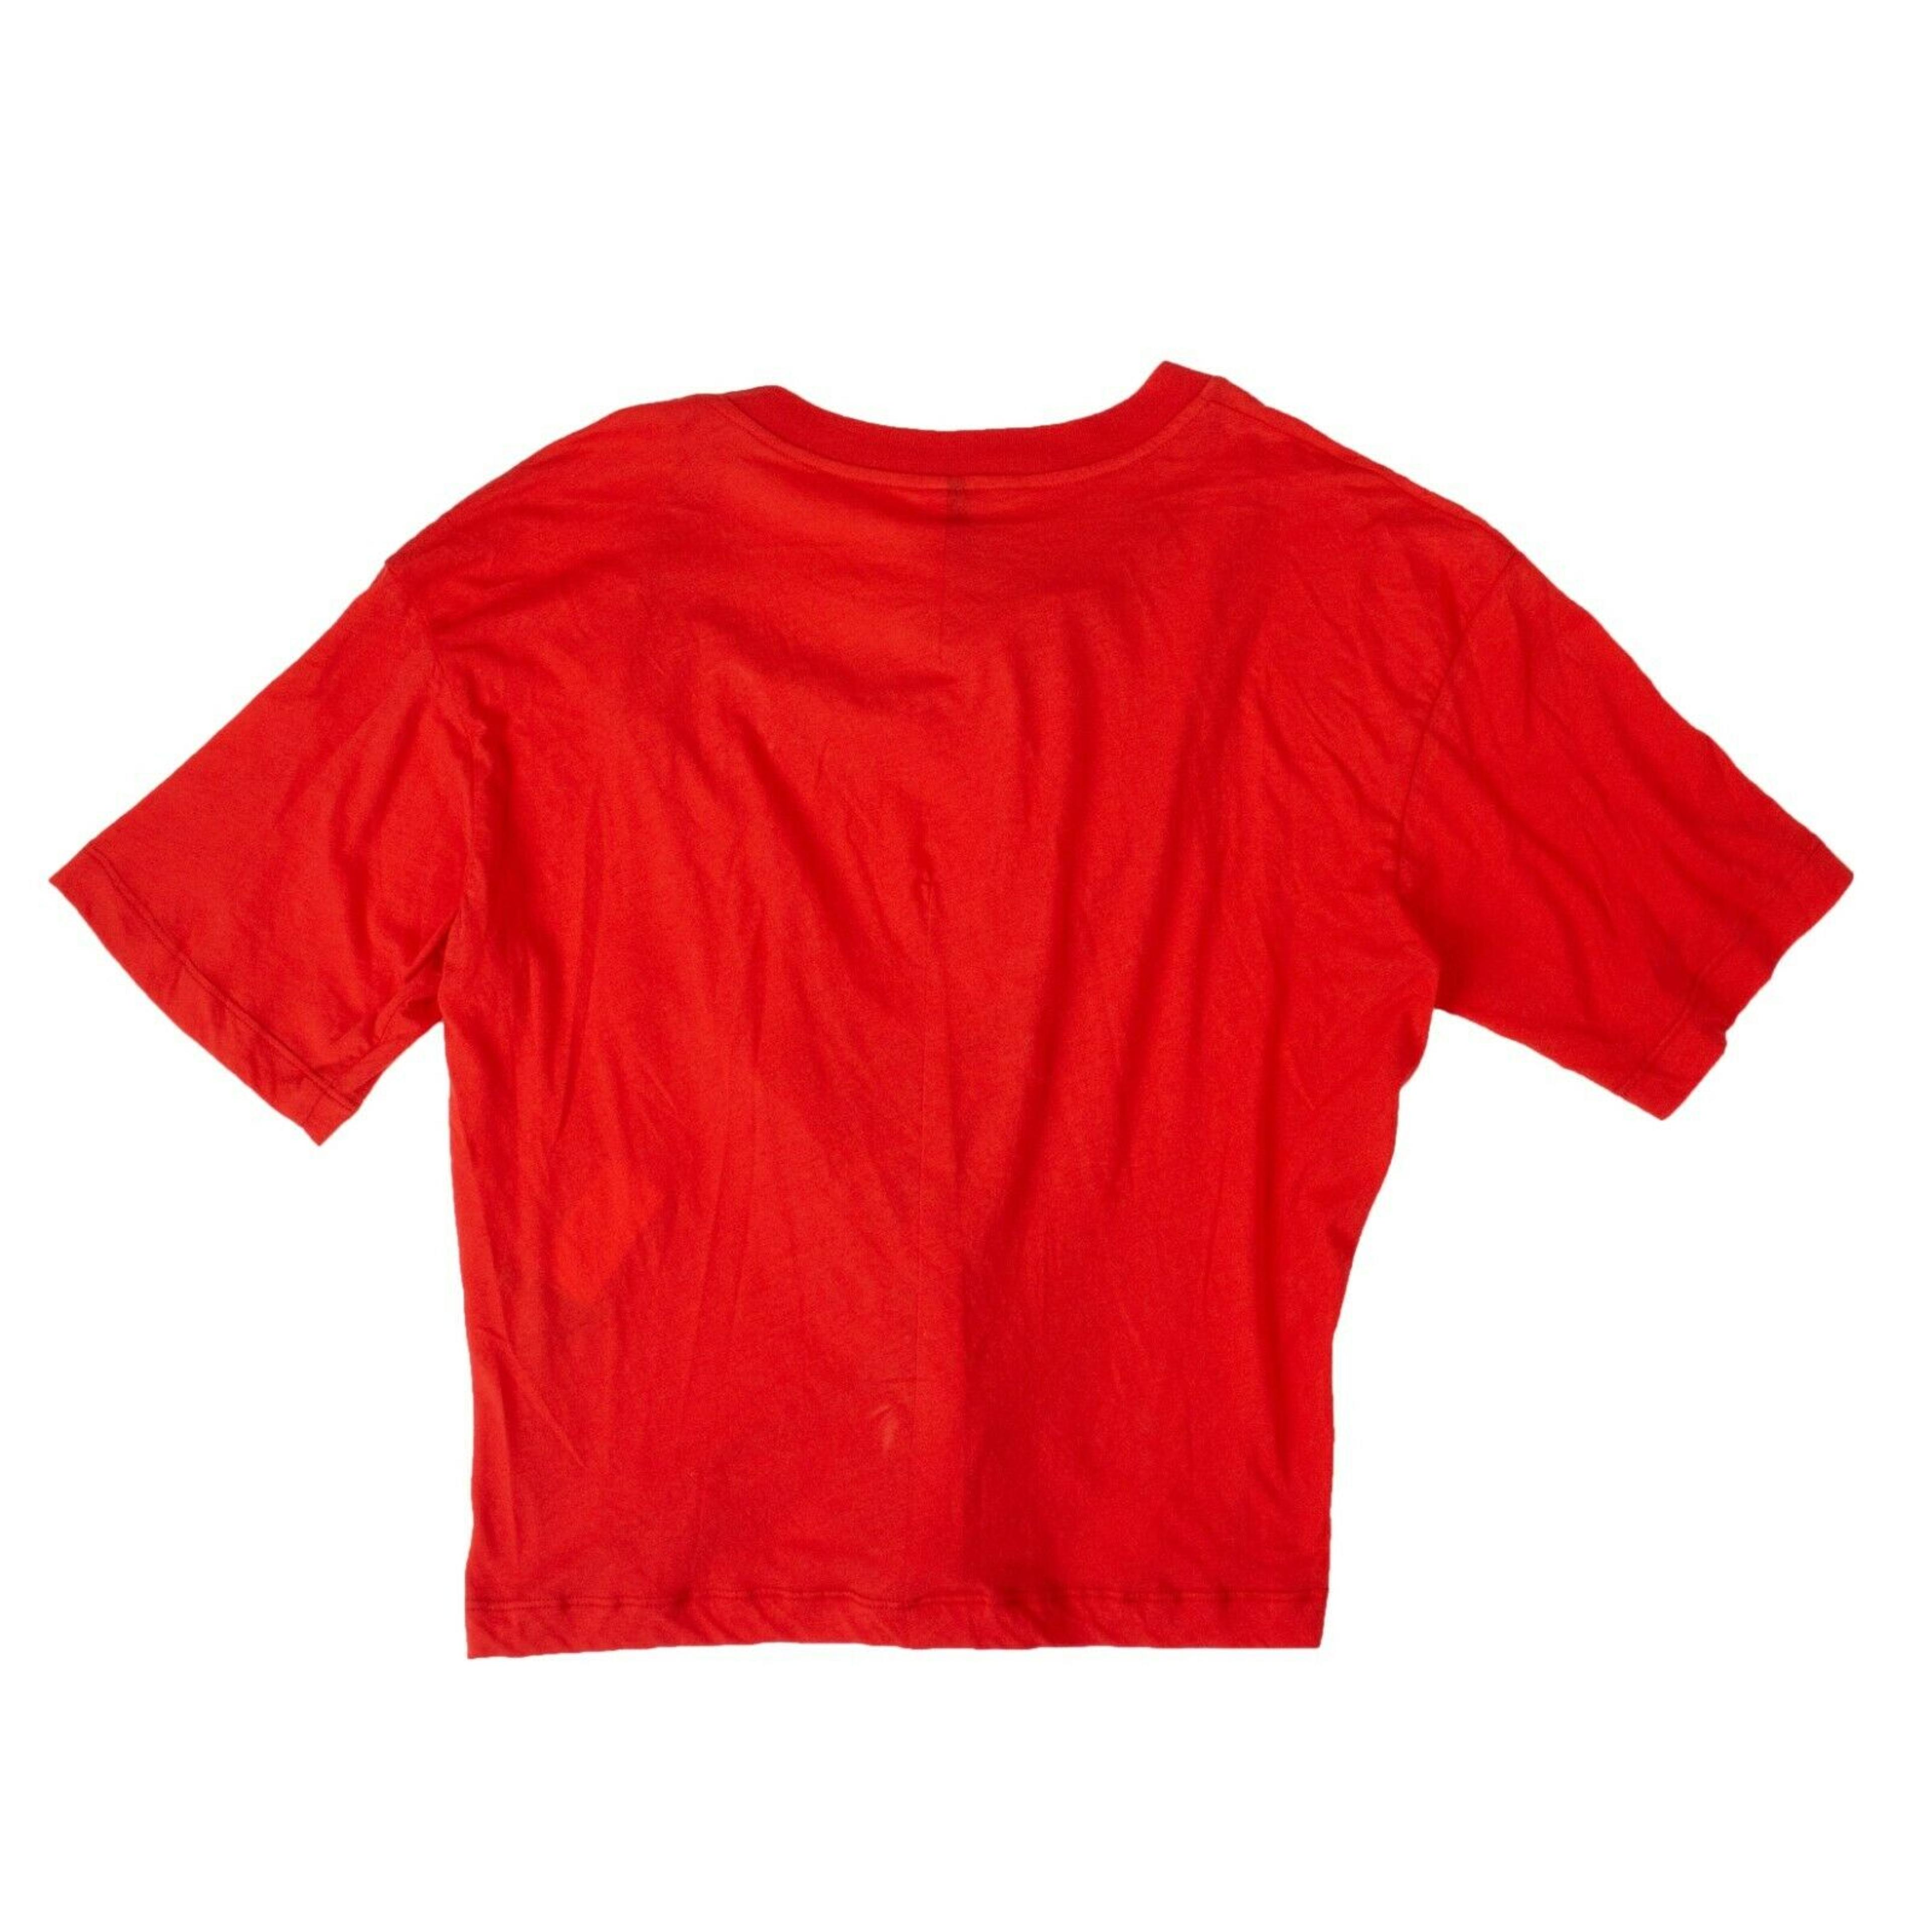 Alternate View 1 of Unravel Project Knot Detailed T-Shirt - Red